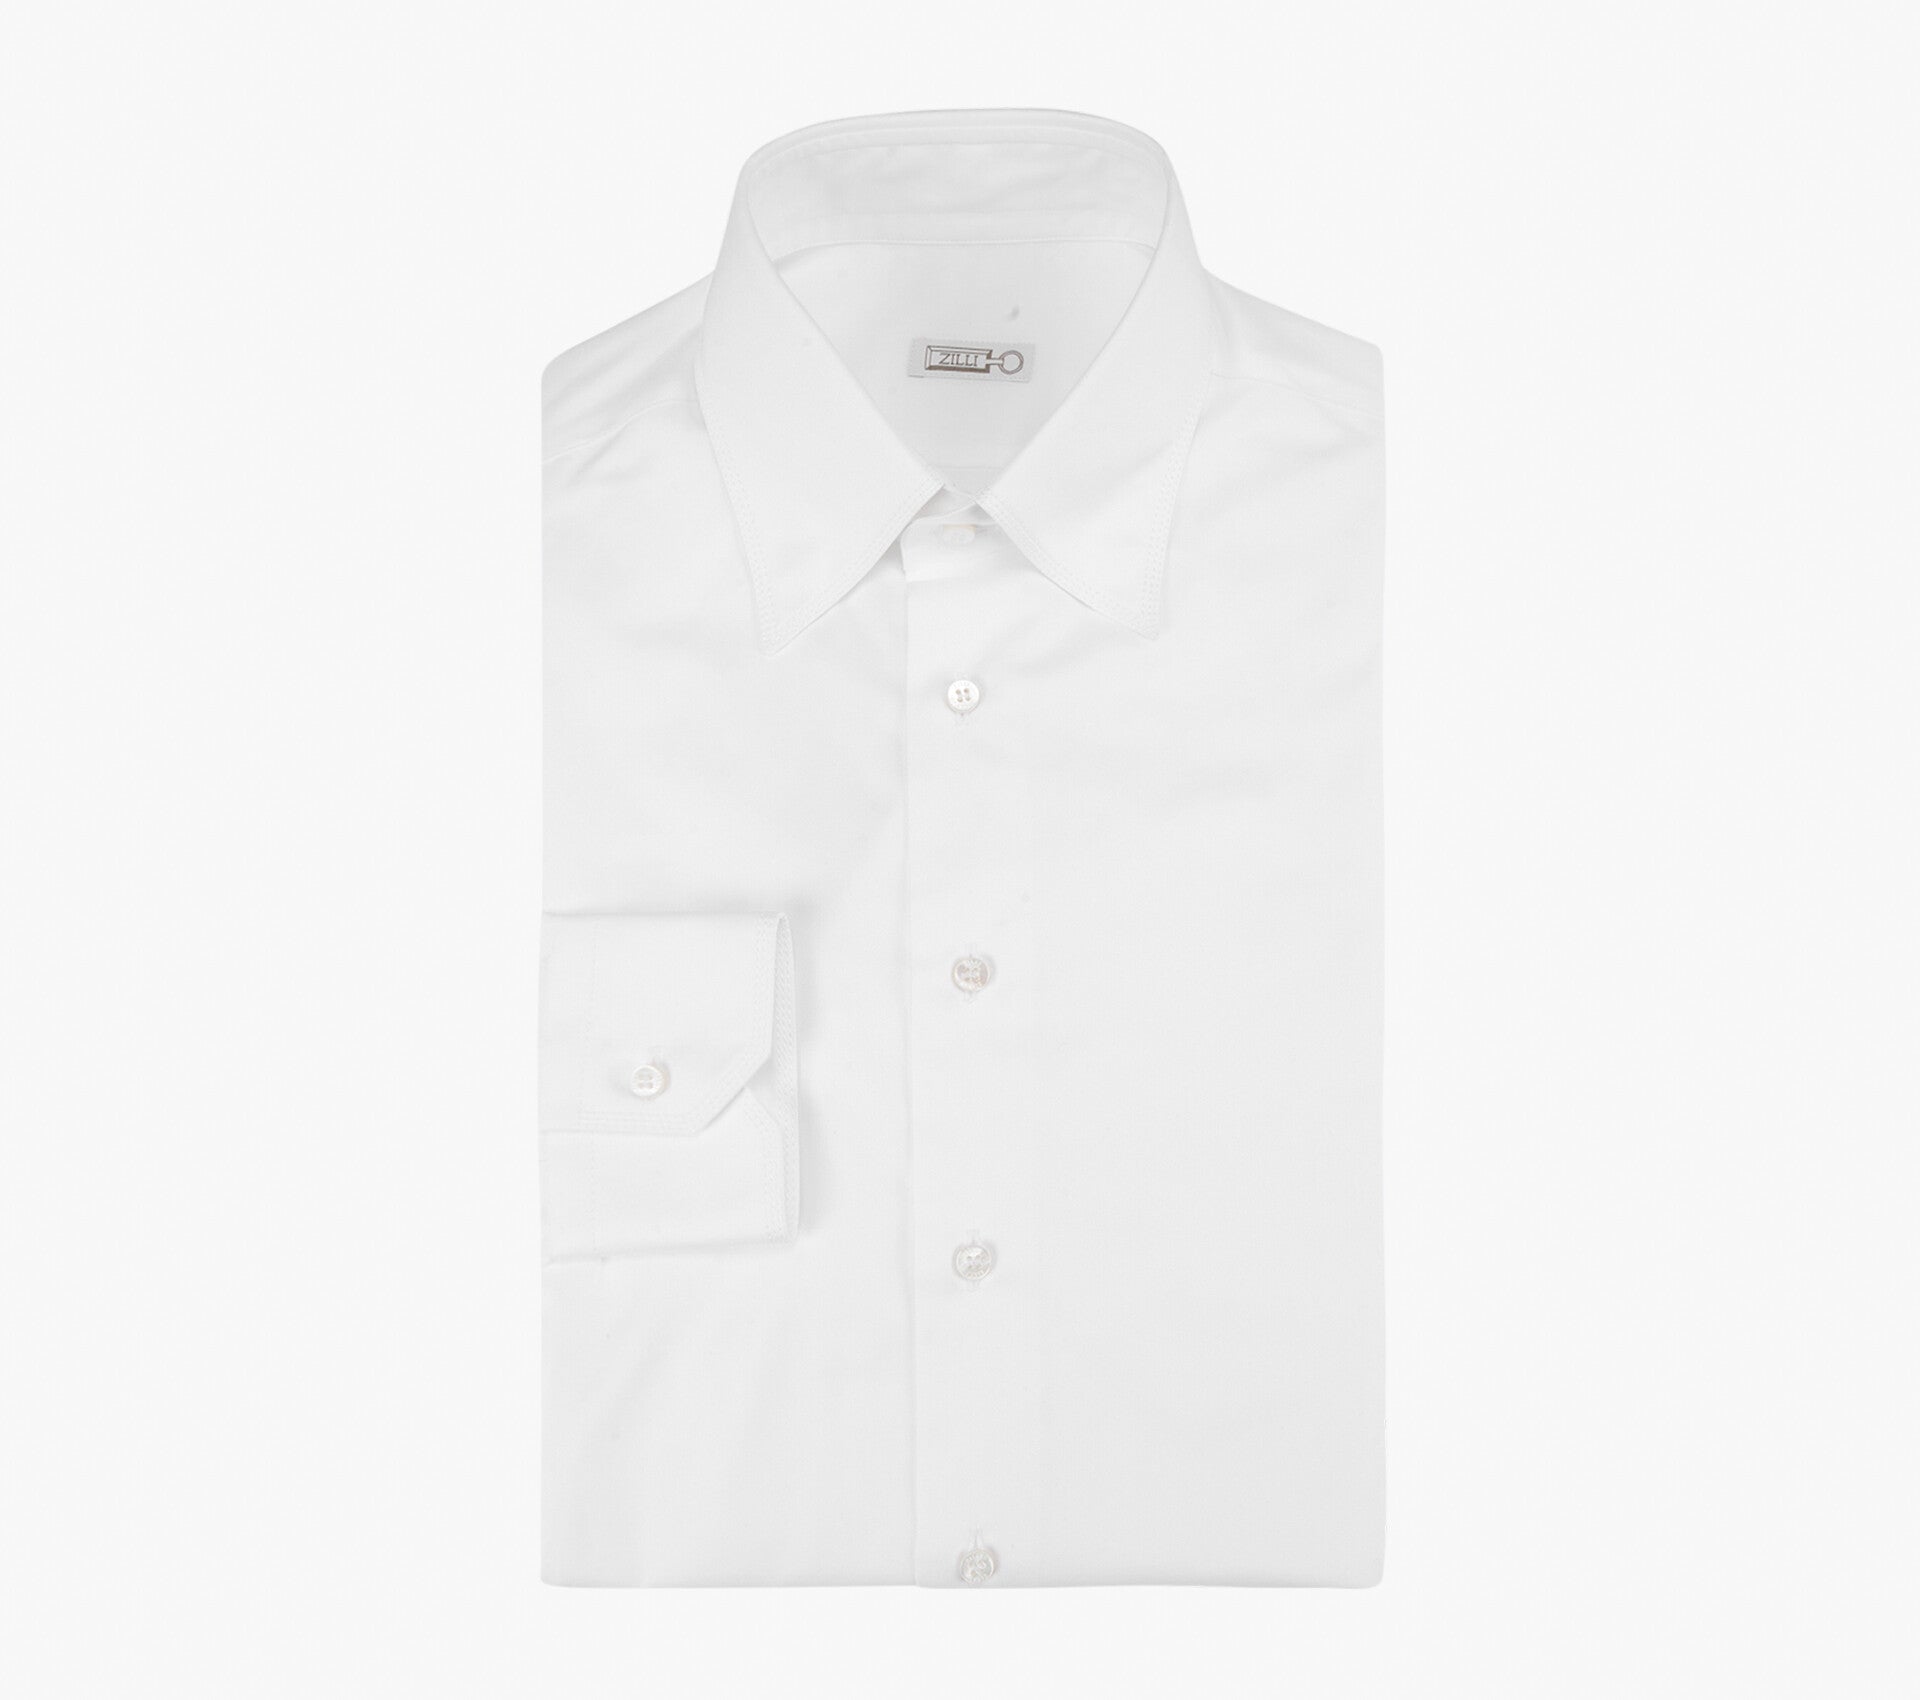 Refined Cotton Shirt with Triple Stitching and Ecru Mother-of-Pearl Buttons